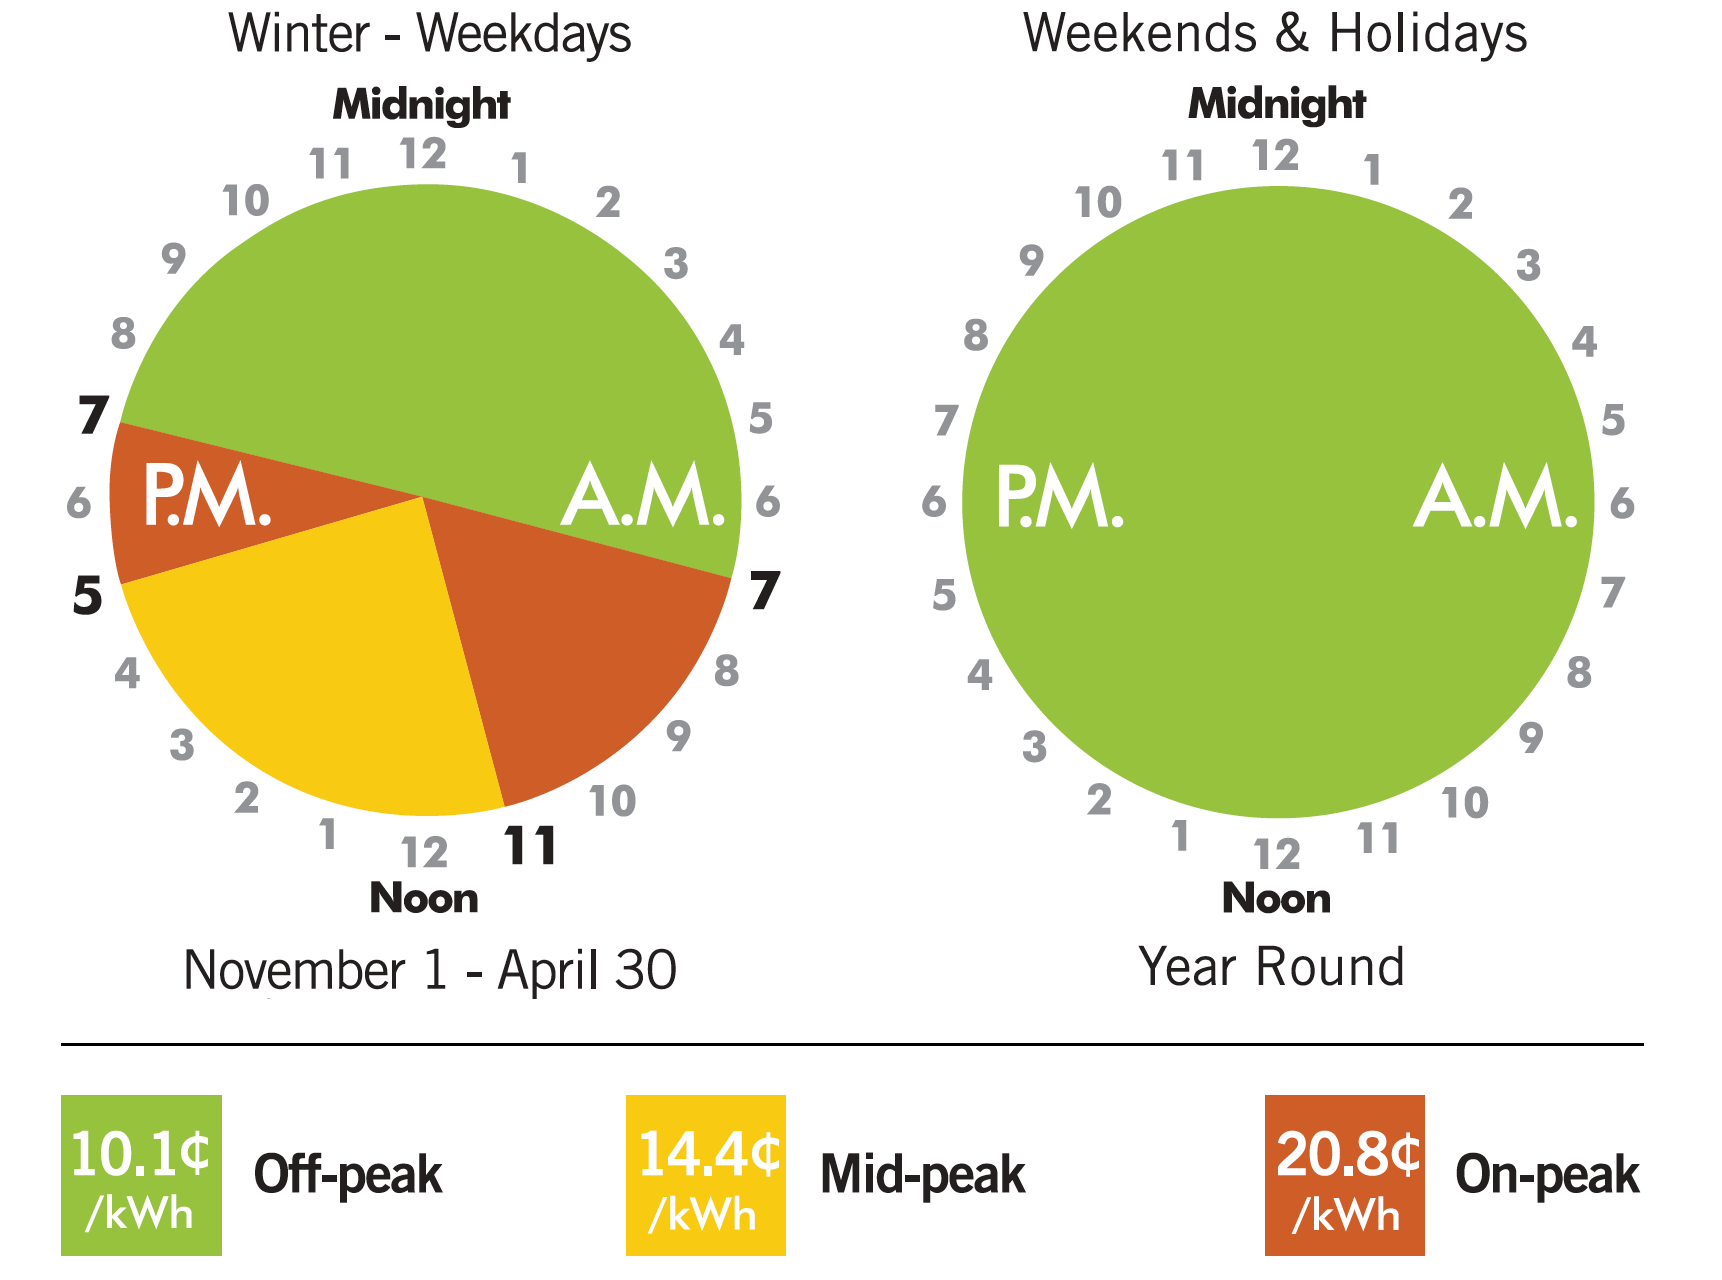 Winter Time of Use prices 10.1 cents off peak 14.4 cents mid-peak 20.8 cents on peak